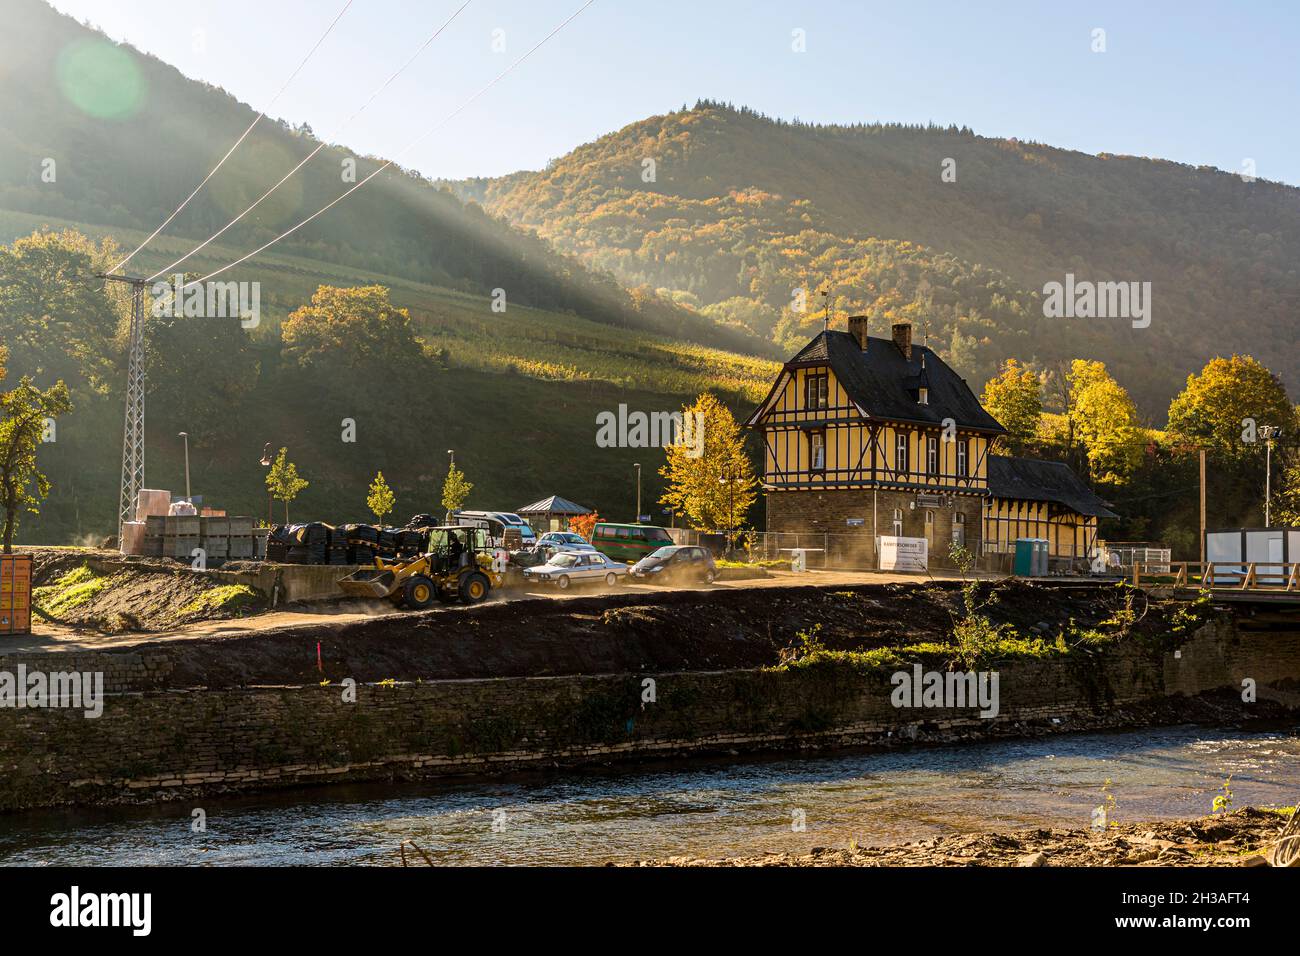 Flood disaster in 2021 in the Ahr valley, Mayschoß, Germany. Almost all houses in the village are uninhabitable and there has been no running water in the houses for months. The station is out of service because the railroad tracks have been washed away Stock Photo